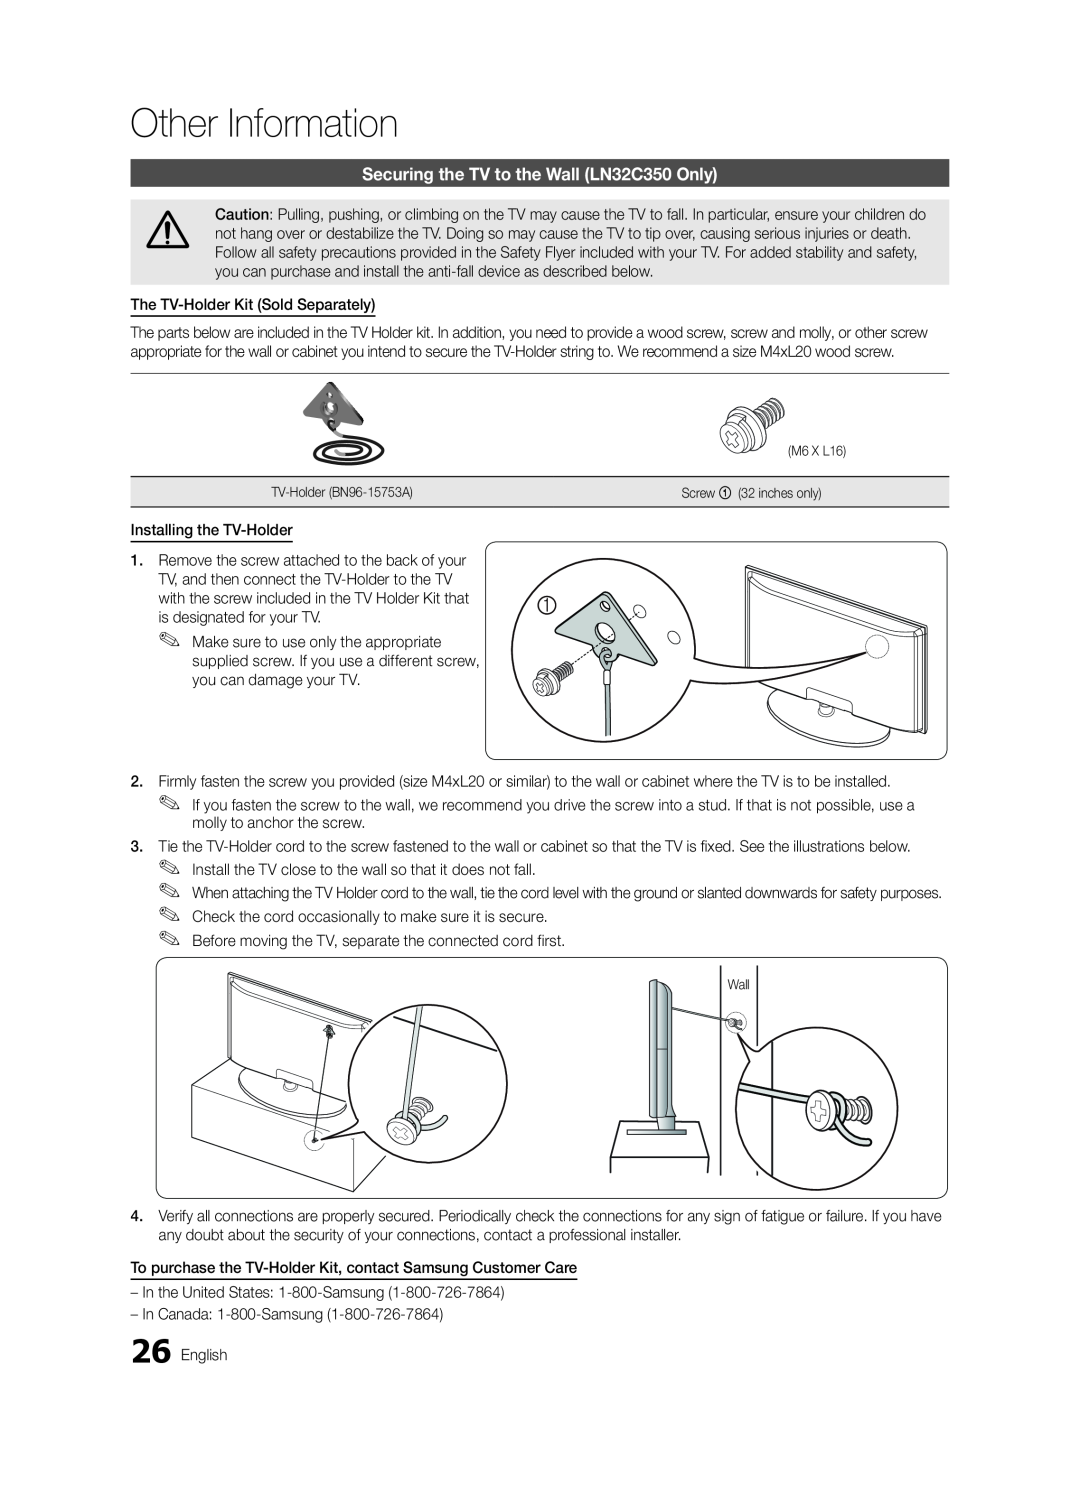 Samsung BN68-02620B-06 user manual Securing the TV to the Wall LN32C350 Only, Other Information 